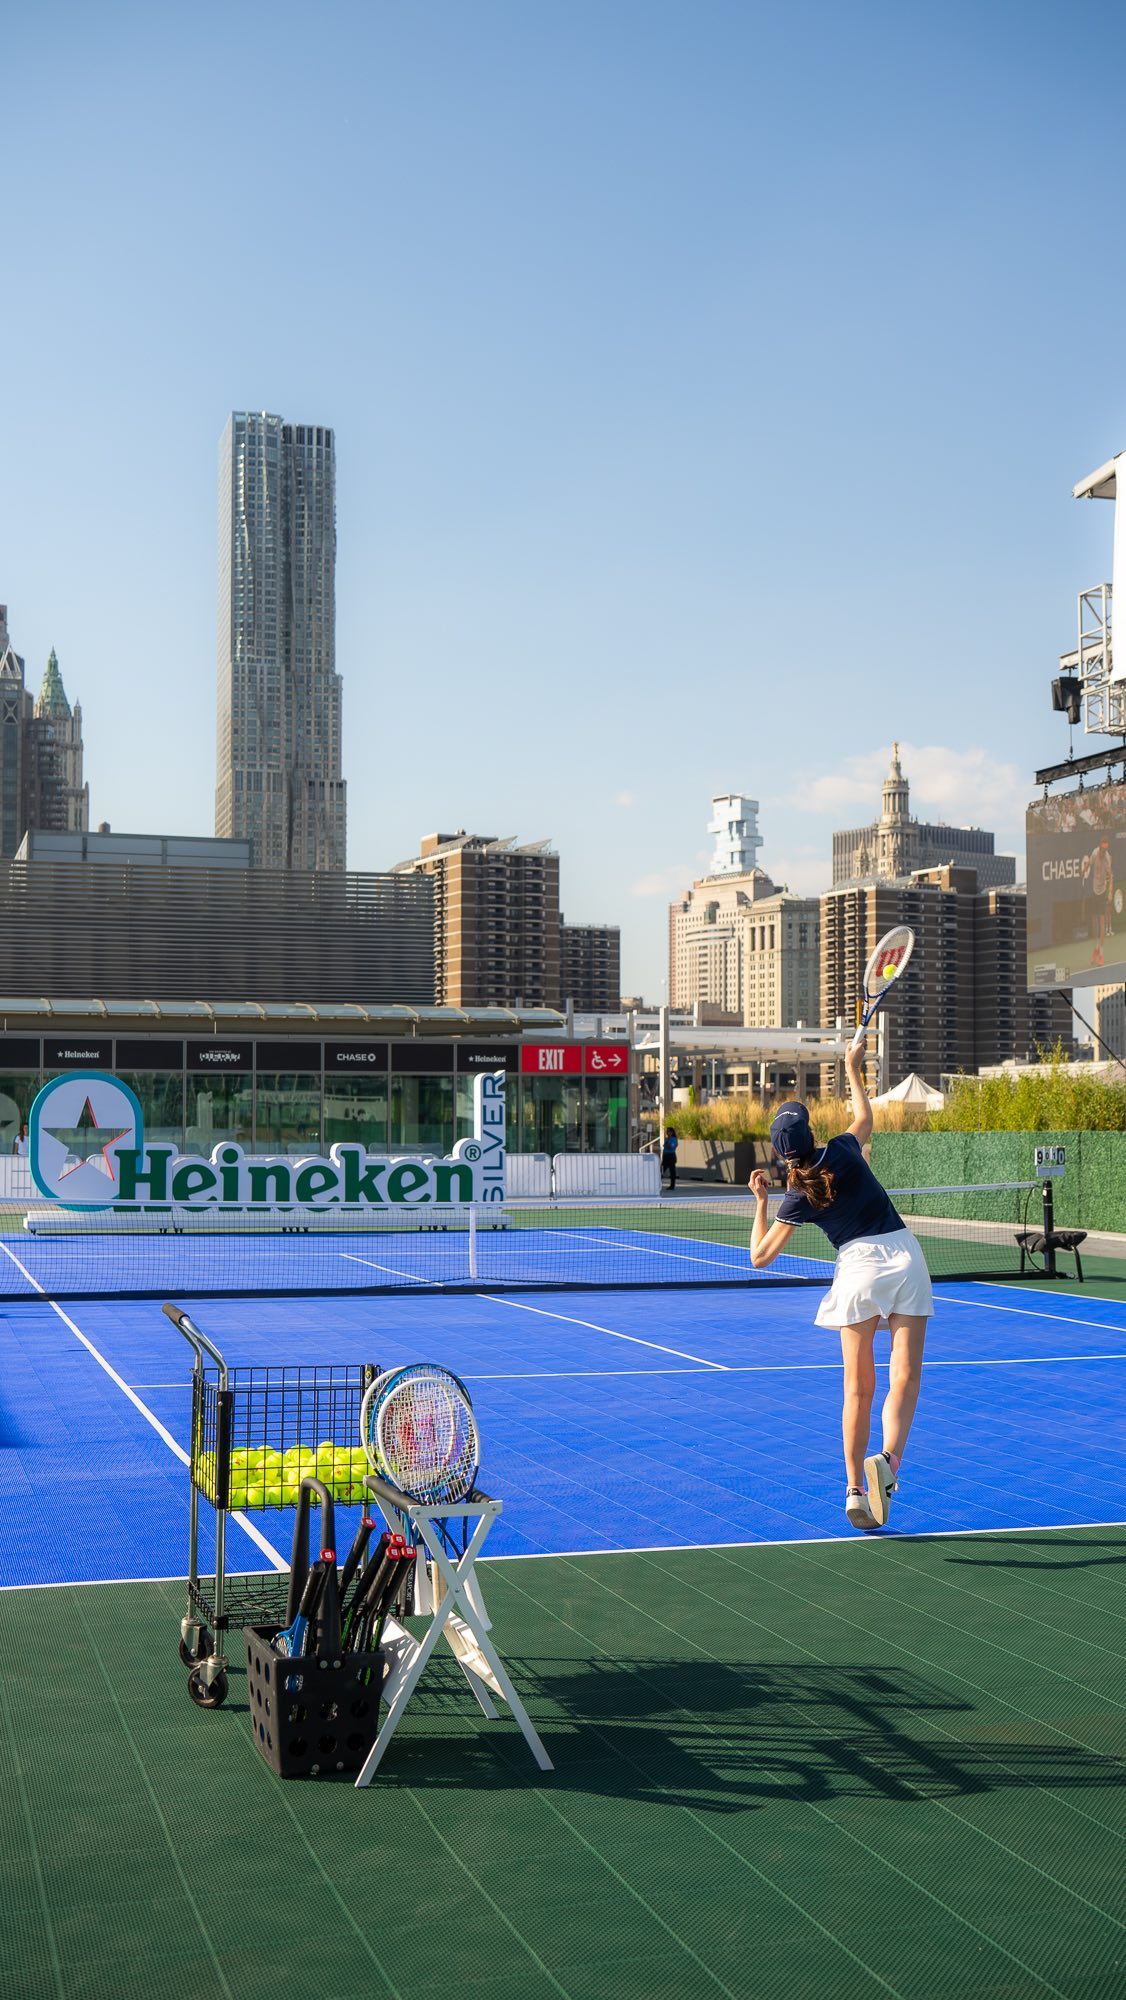 Game. Set. Match. Tennis with a view. Our pop-up tennis court is now open on The Rooftop at Pier 17. Swing by for skyline views, play and refreshments ↴ 🗓️ Now – Sept. 9  The Rooftop at Pier 17 Details ➤ link in bio Presented by Chase Sapphire, Heineken, and Grey Goose. #TheSeaport